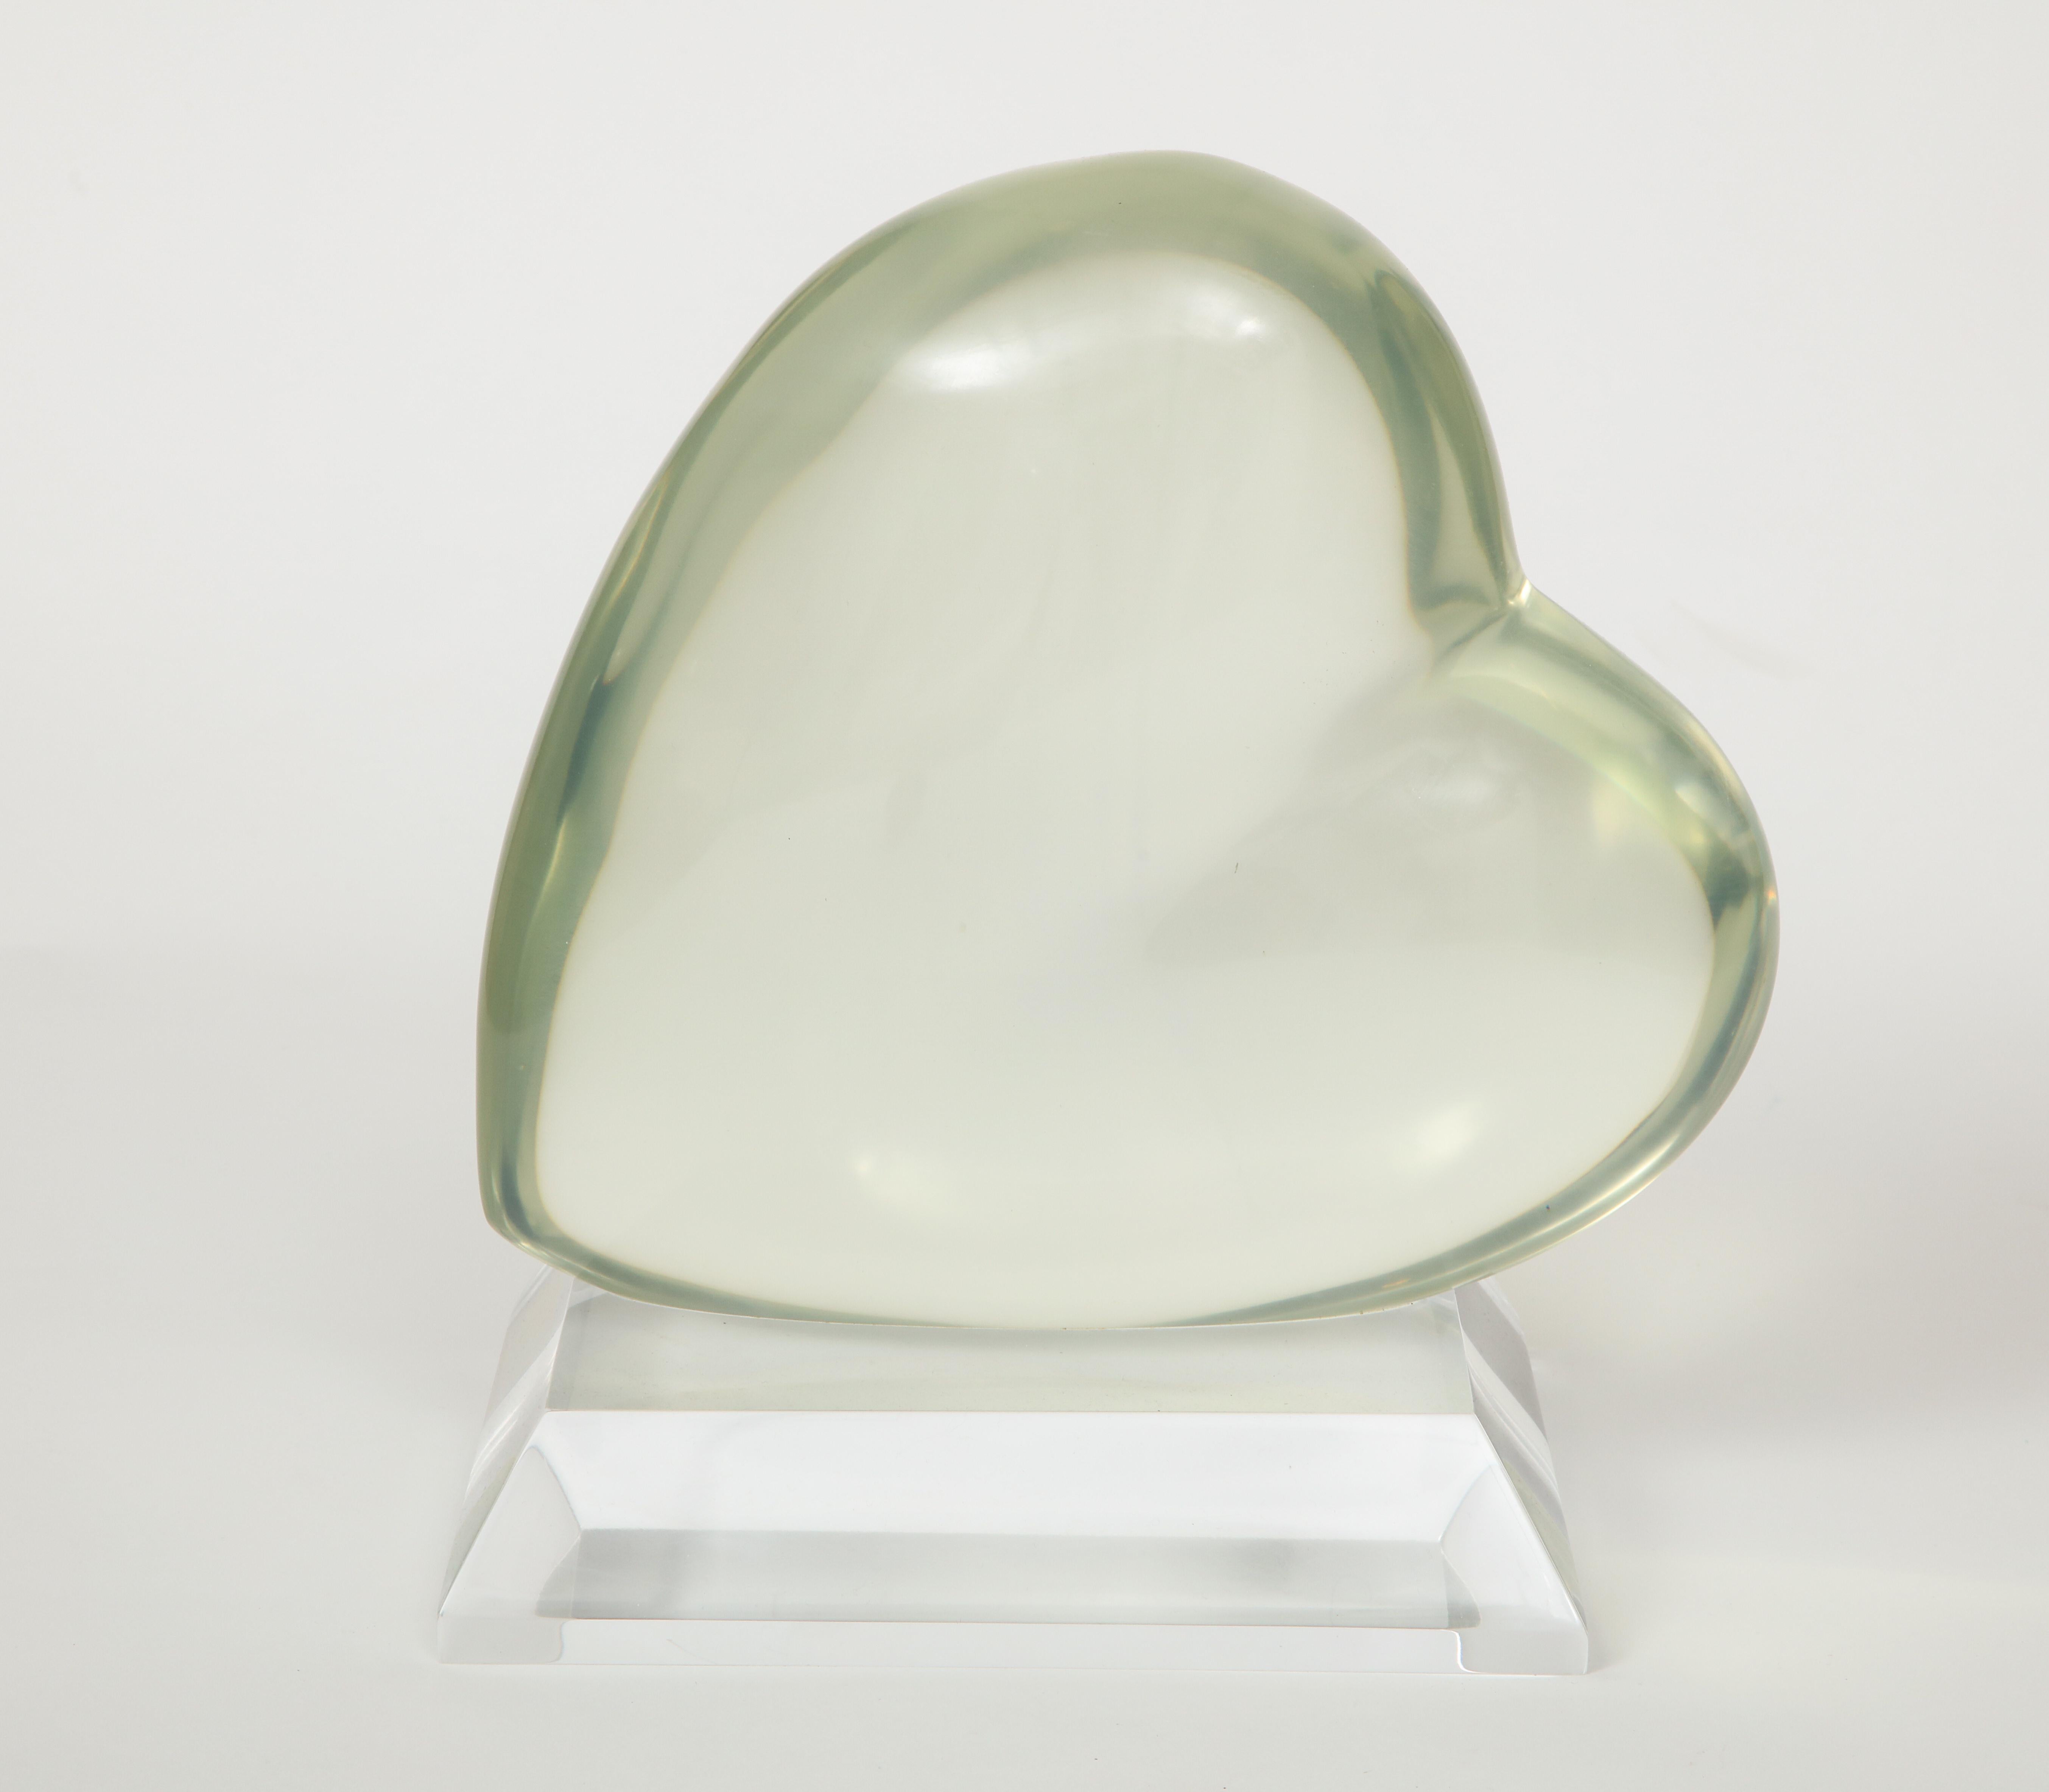 Molded Lucite Heart Sculpture by Shlomi Haziza